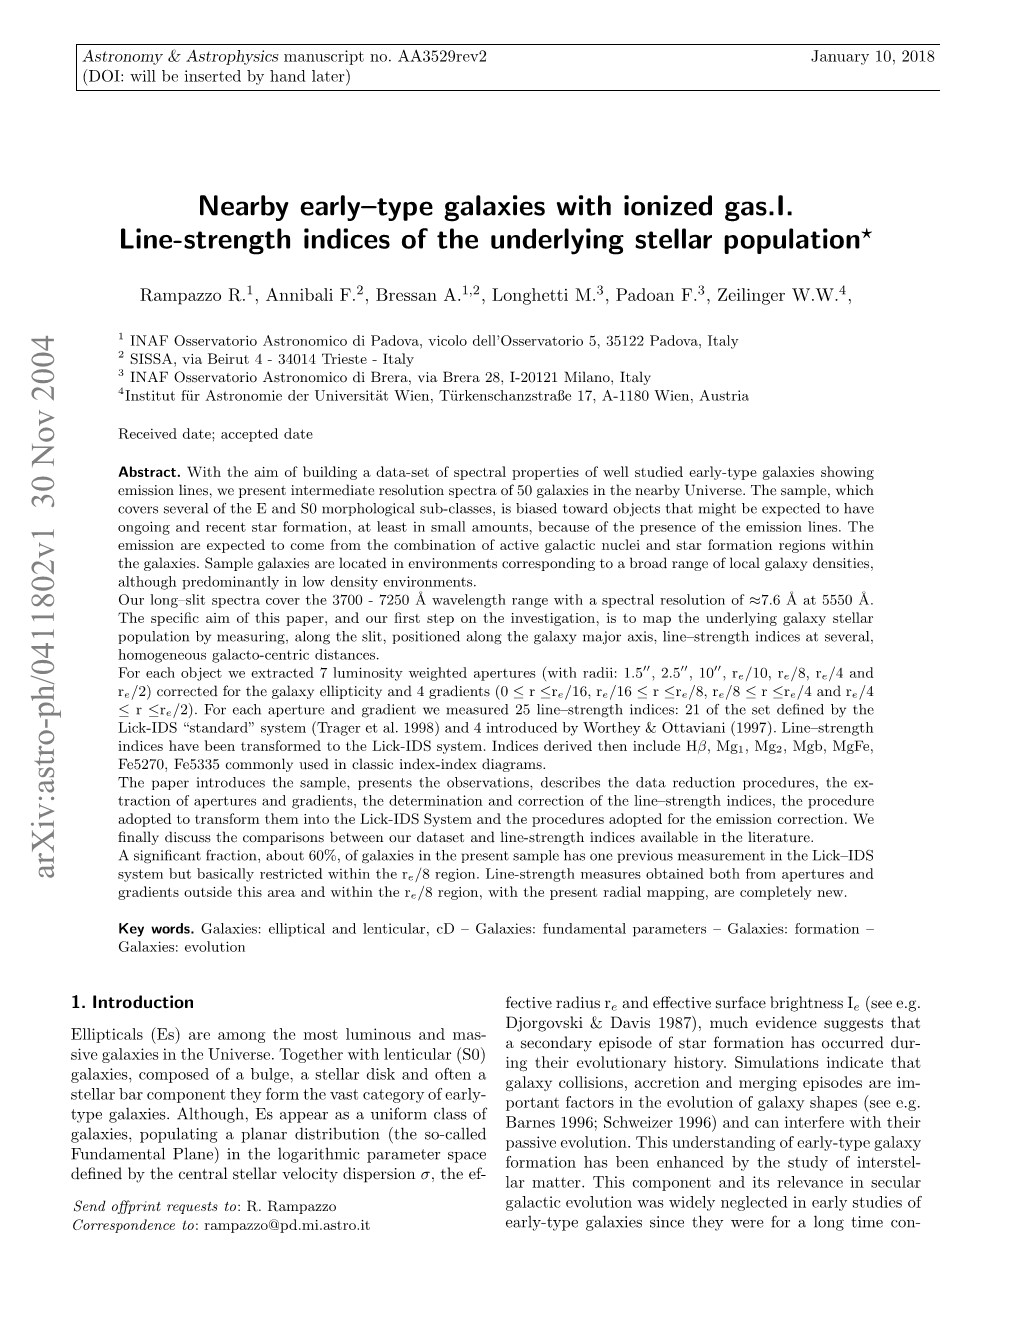 Nearby Early-Type Galaxies with Ionized Gas. I. Line-Strength Indices